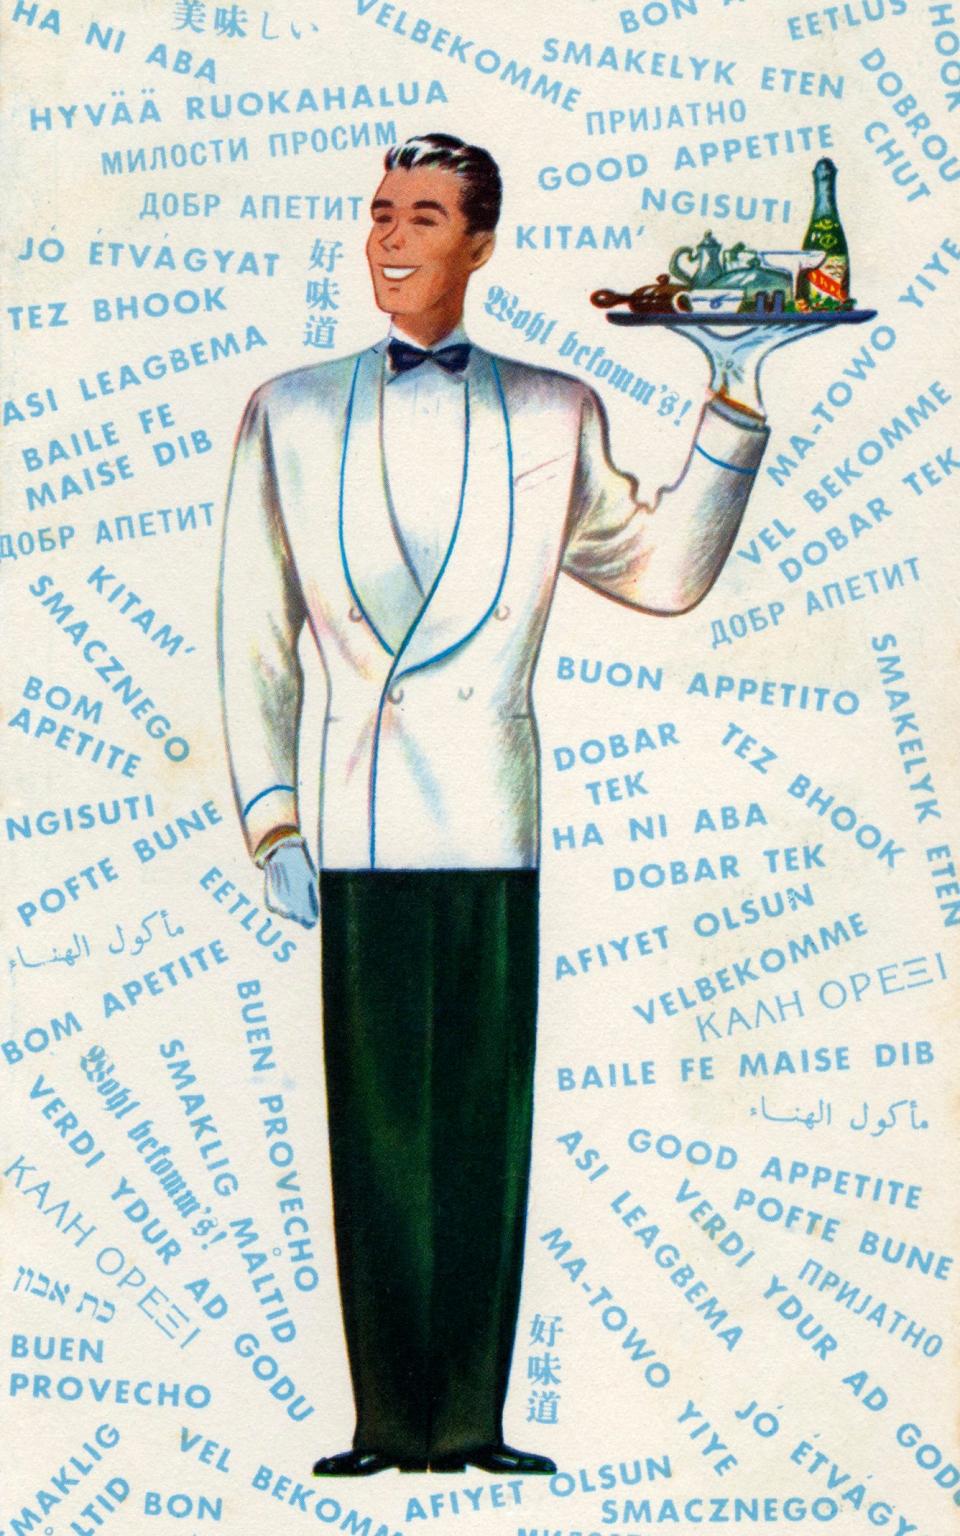 Pan Am's onboard menu from c.  1950 shows a waiter serving food and drinks